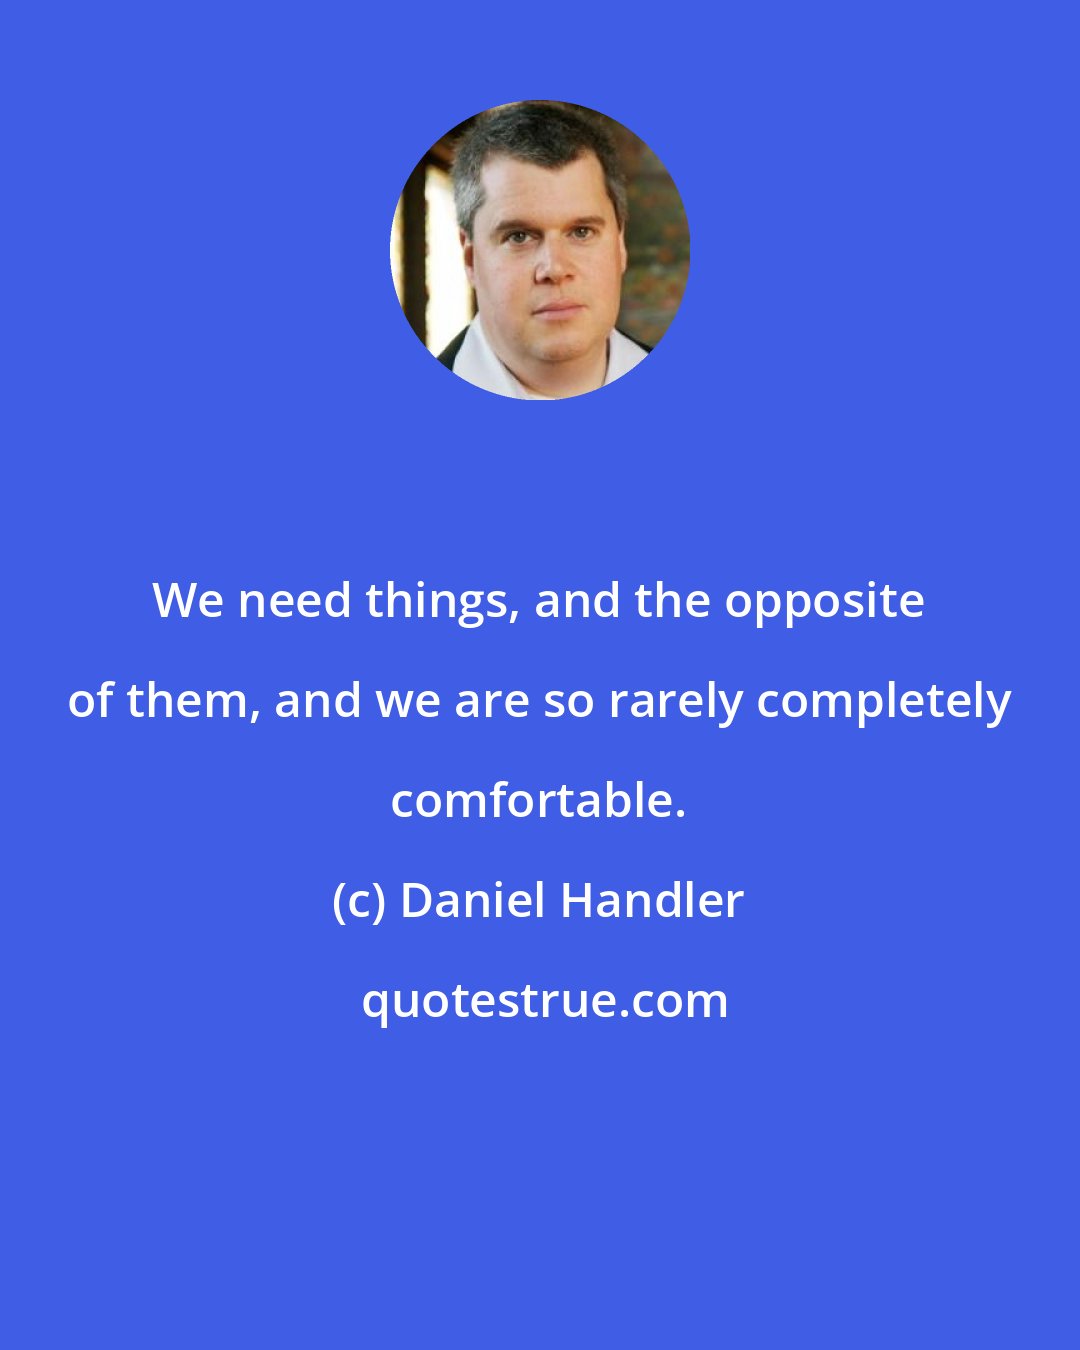 Daniel Handler: We need things, and the opposite of them, and we are so rarely completely comfortable.